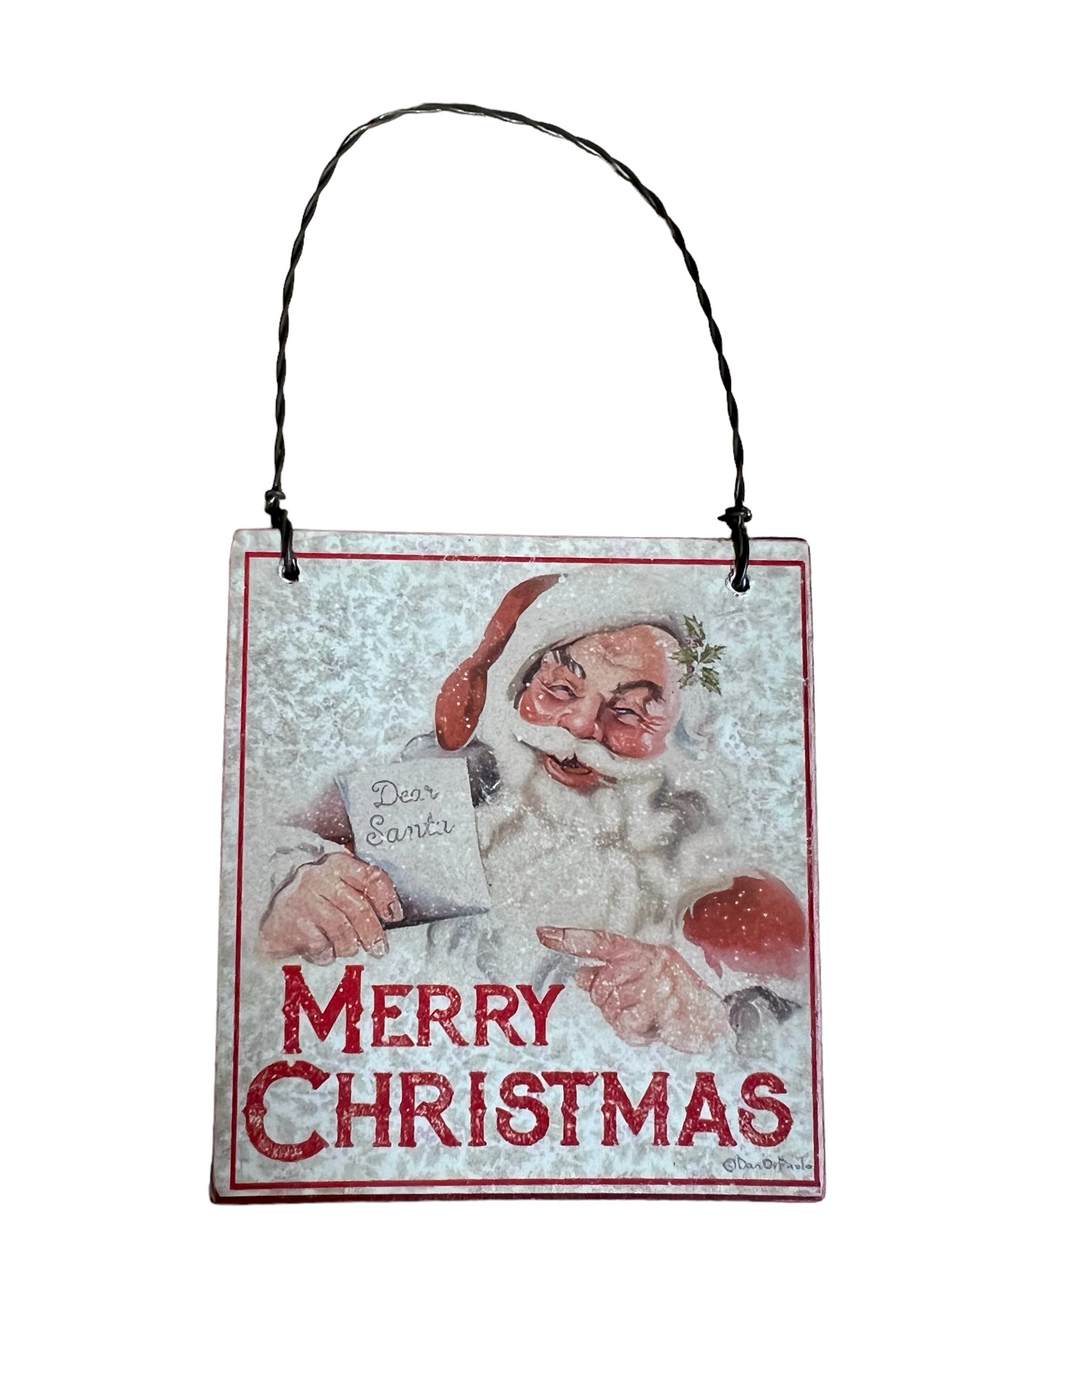 Merry Christmas Santa Ornament - The Teal Antler Boutique